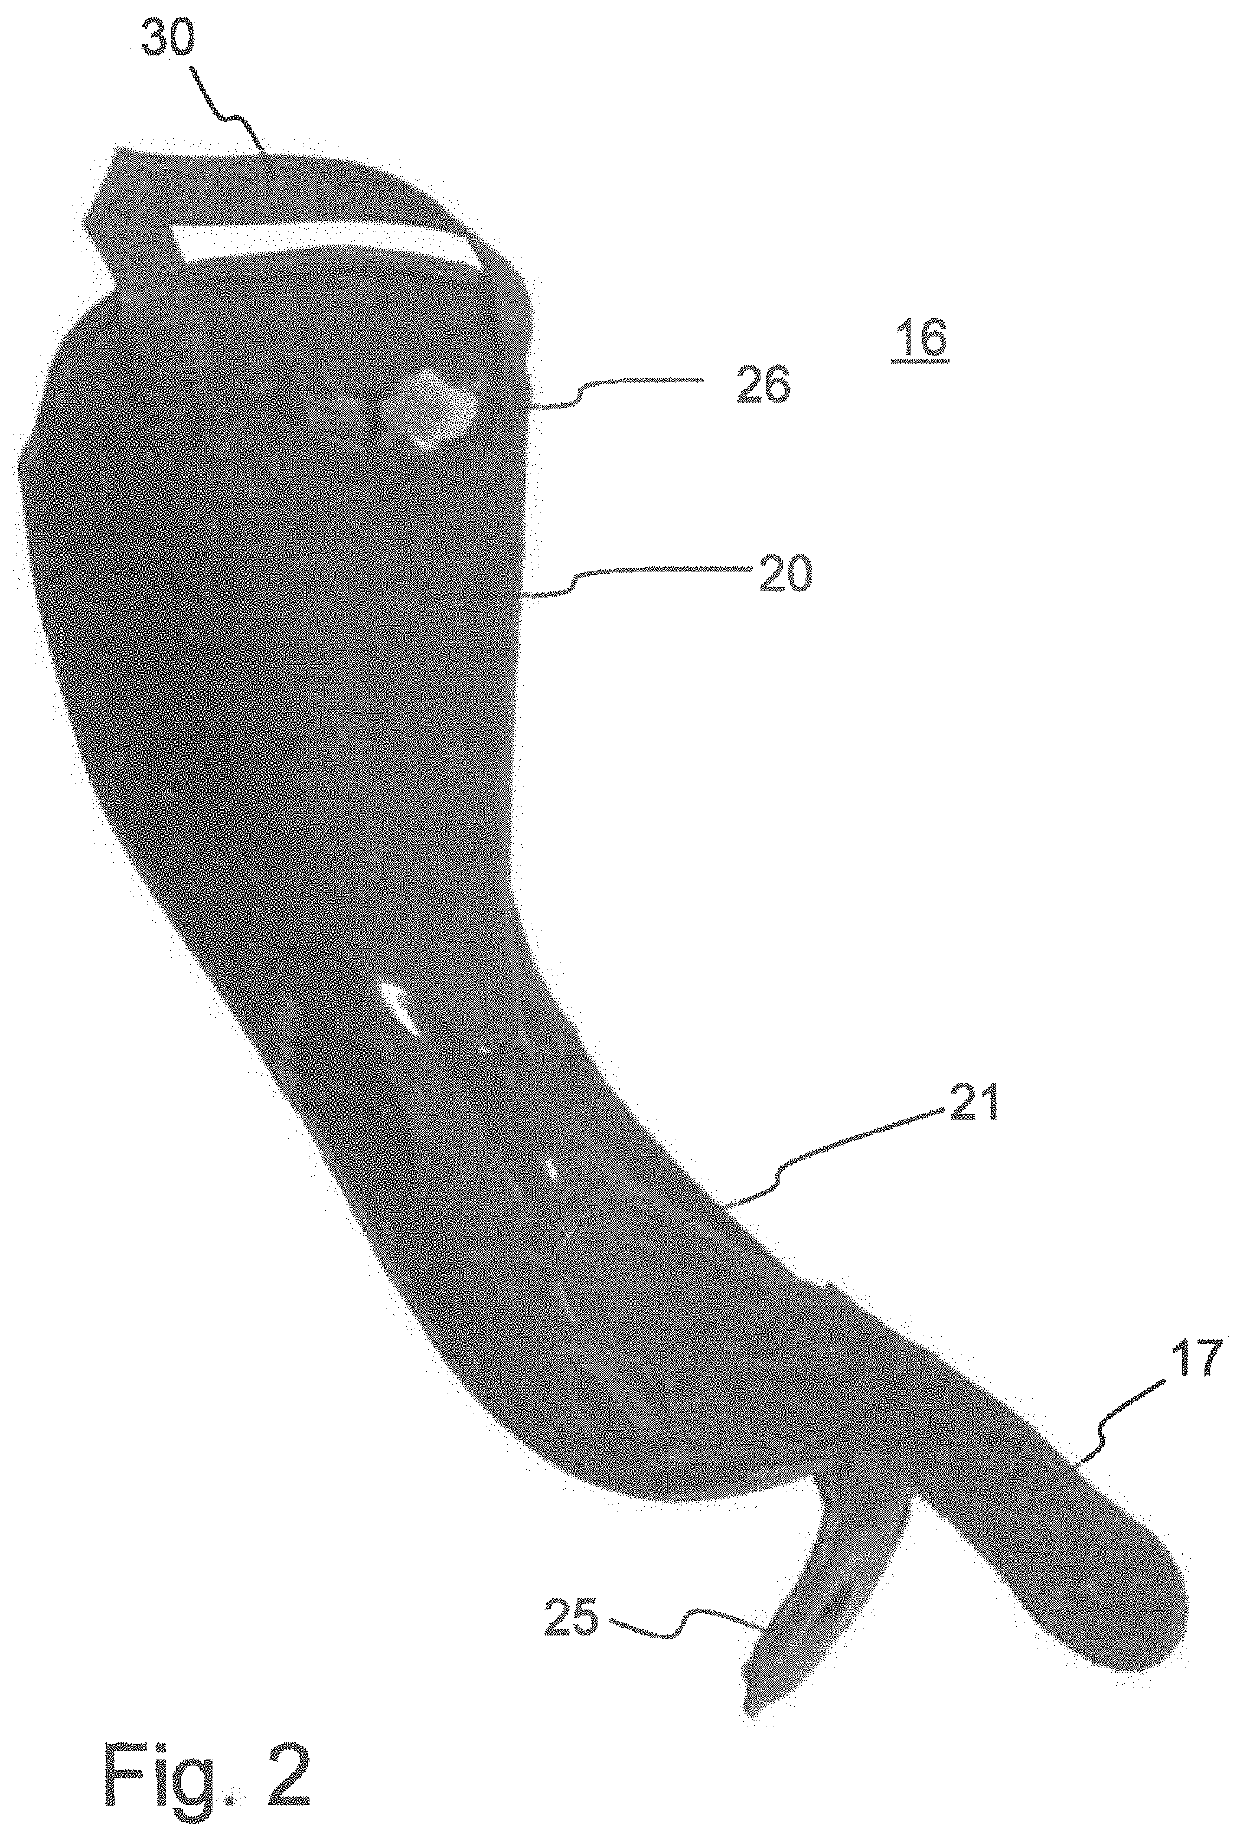 Detachable tongue for injected slipper, with associated slipper and boot